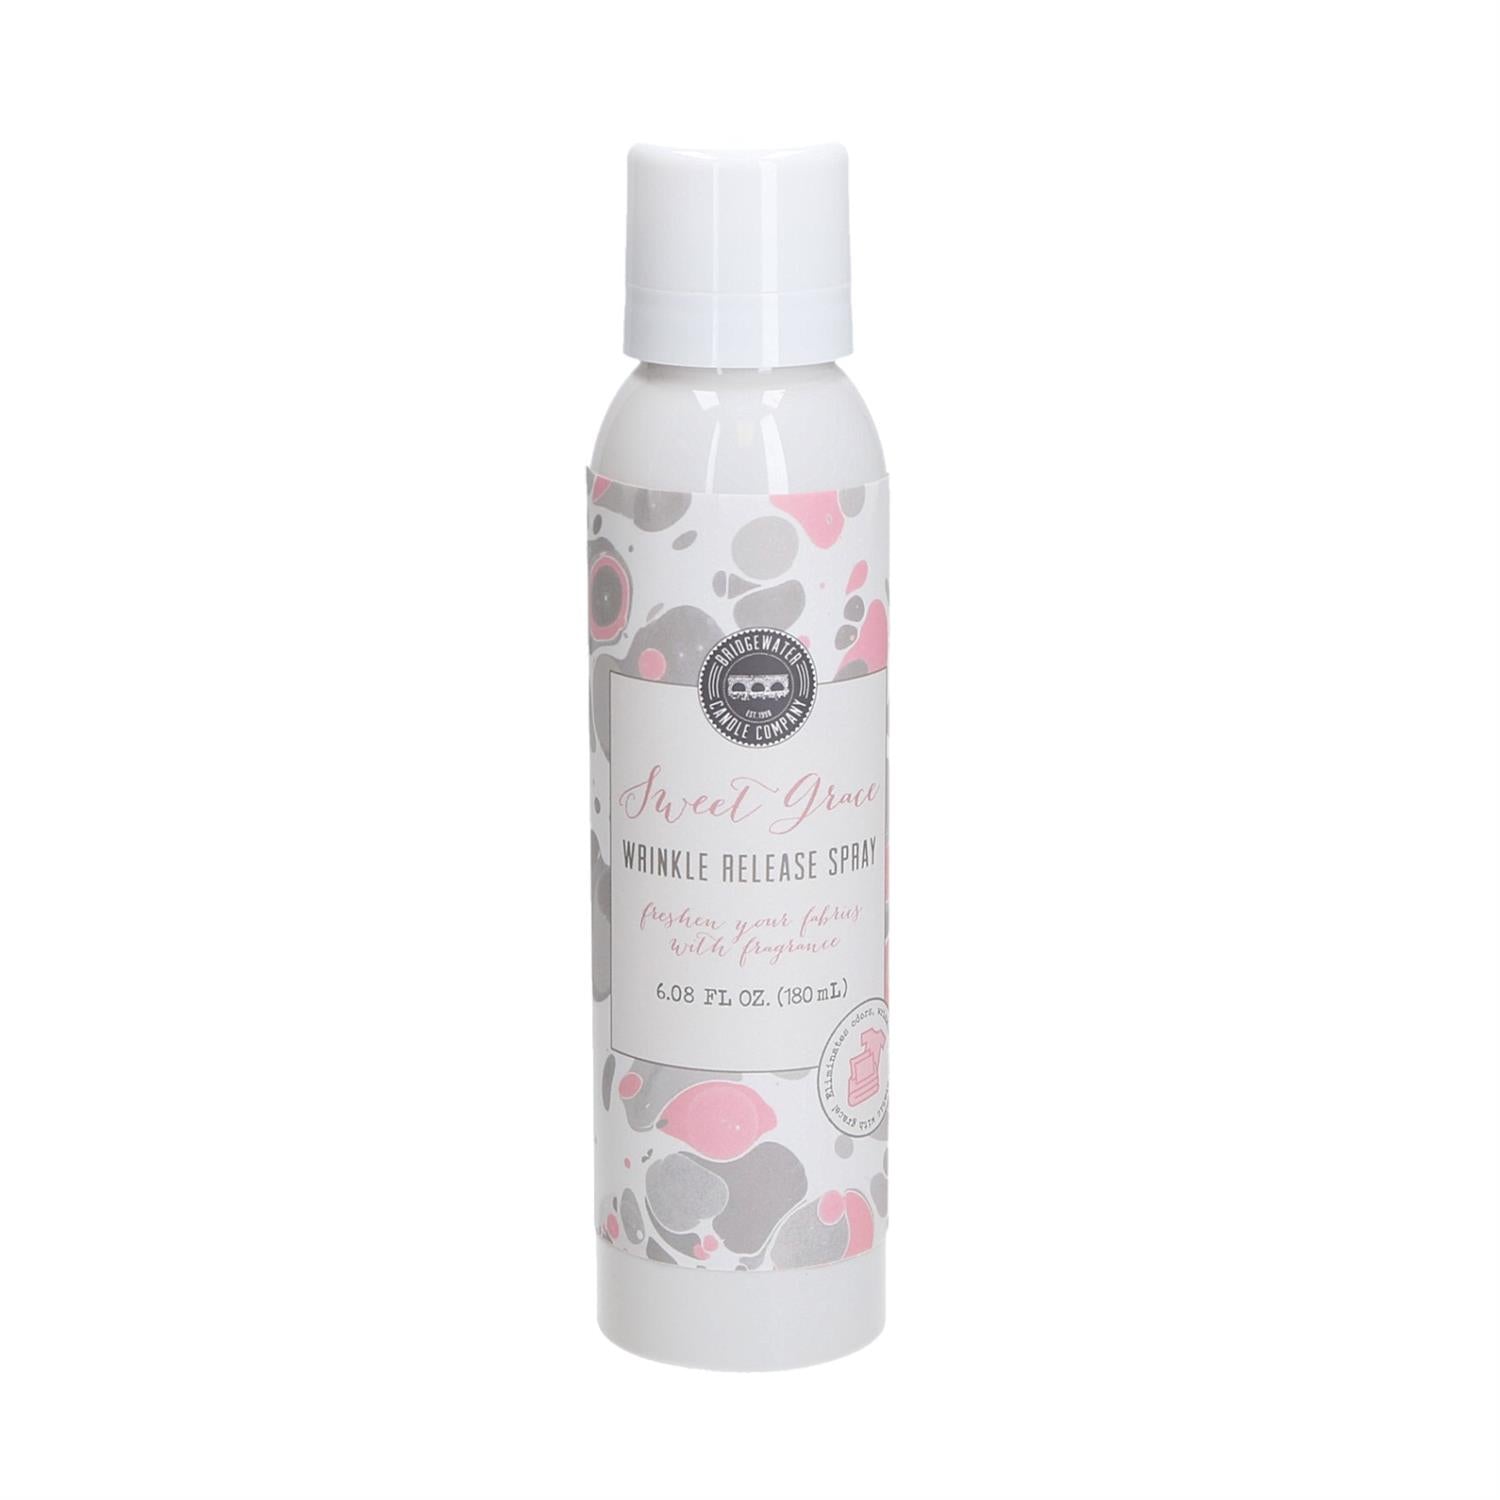 Sweet Grace Wrinkle Release Spray - Be You Boutique